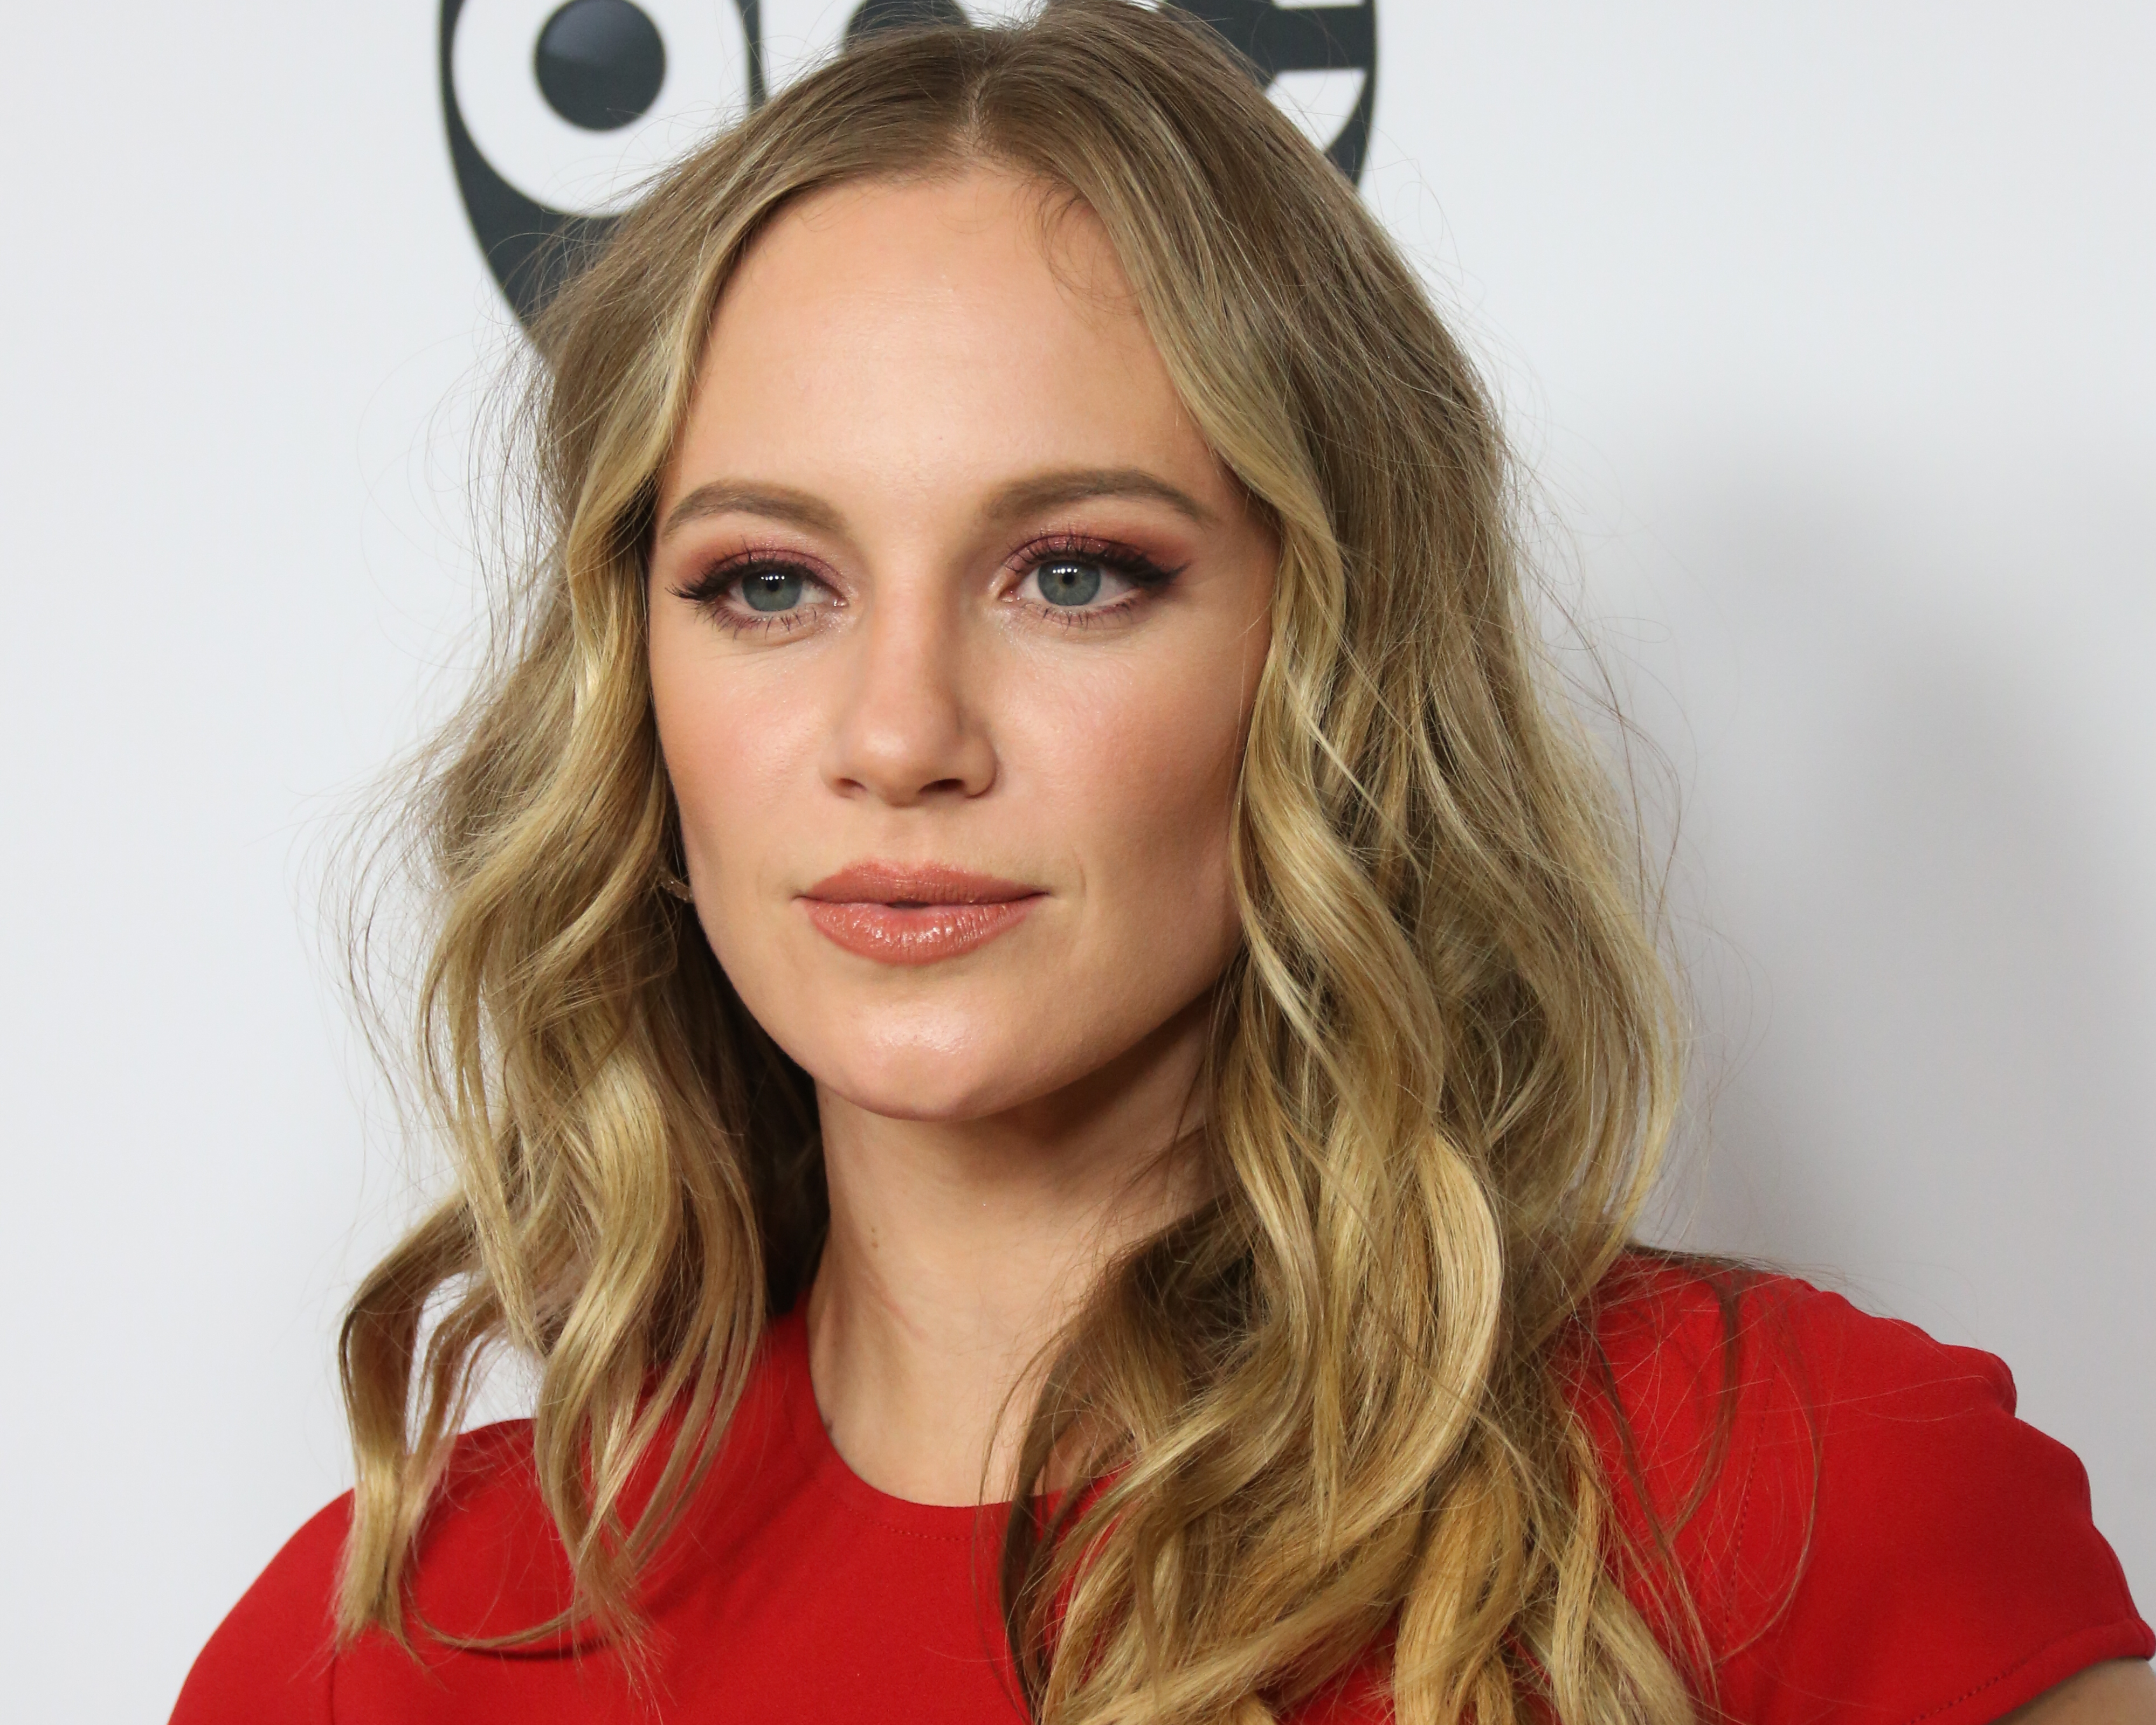 Description: Actress Danielle Savre attends the Disney and ABC Television 2019 TCA Winter press tour at The Langham Huntington Hotel and Spa on February 5, 2019, in Pasadena, California. | Source: Getty Images